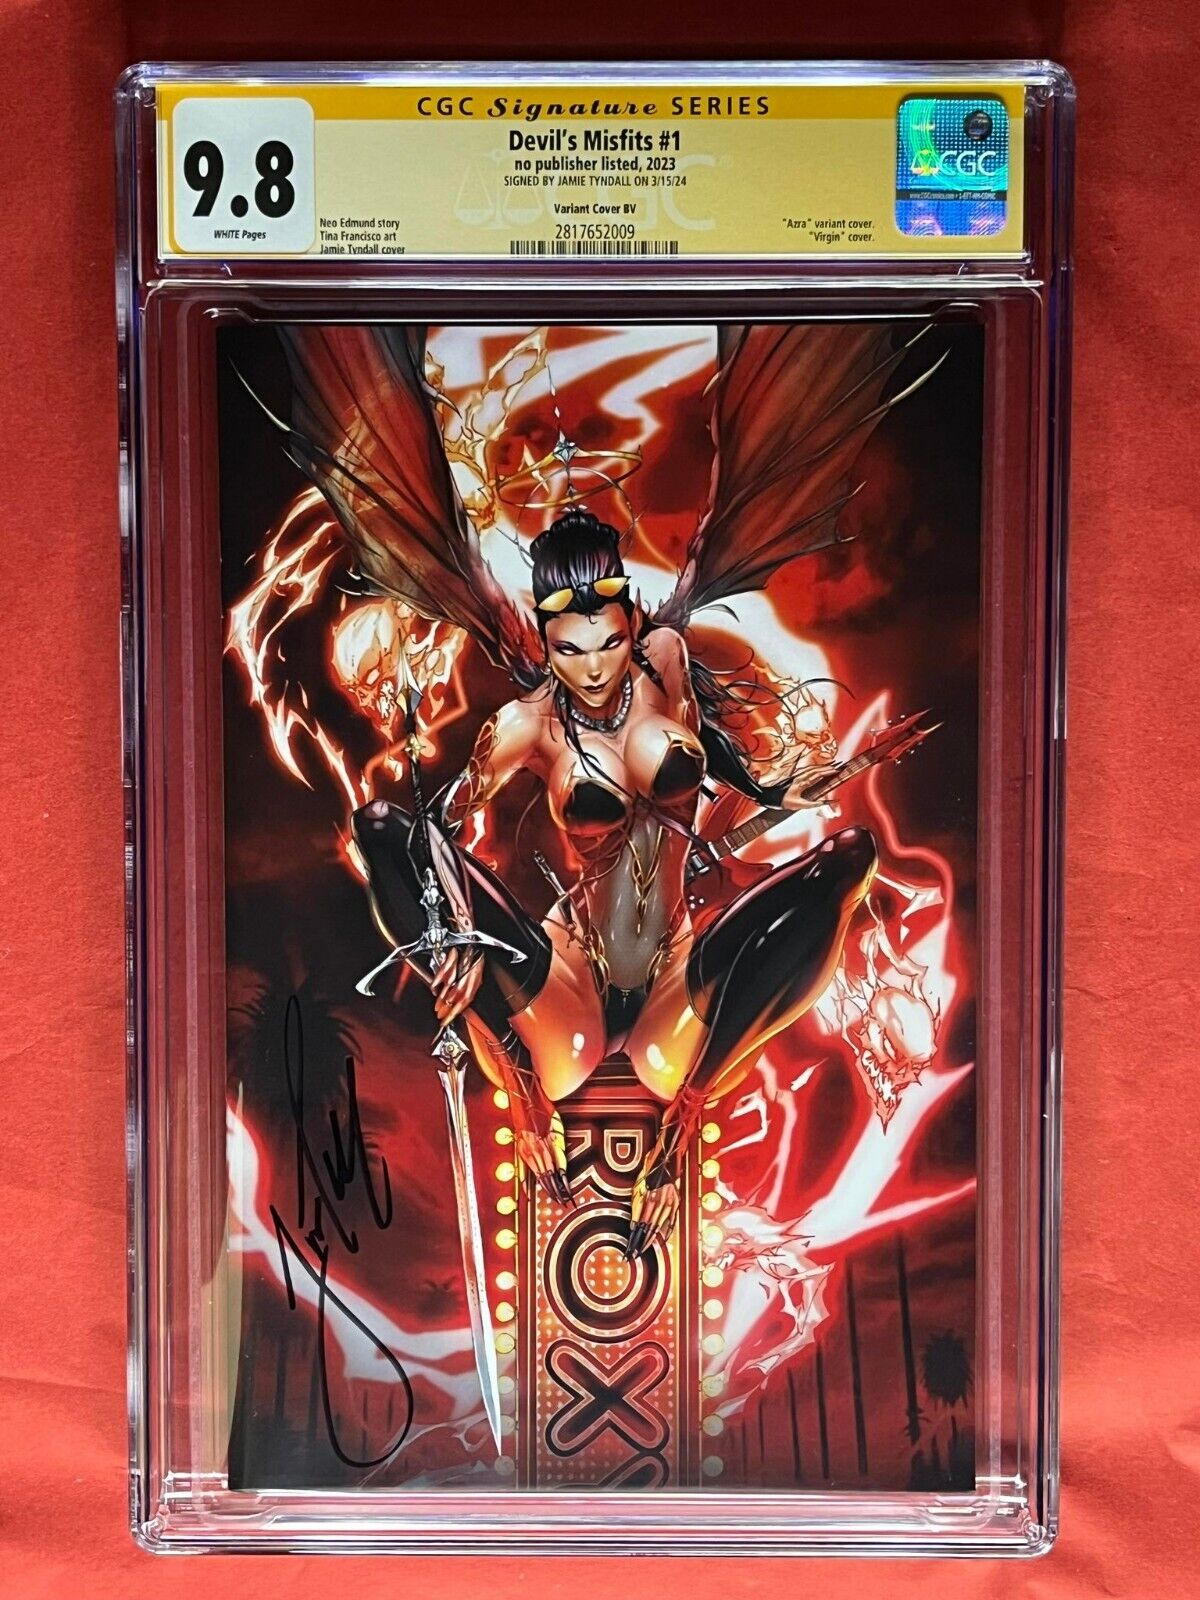 The Devil’s Misfits 1 Cover BV Variant CGC 9.8 SS signed by Jamie Tyndall